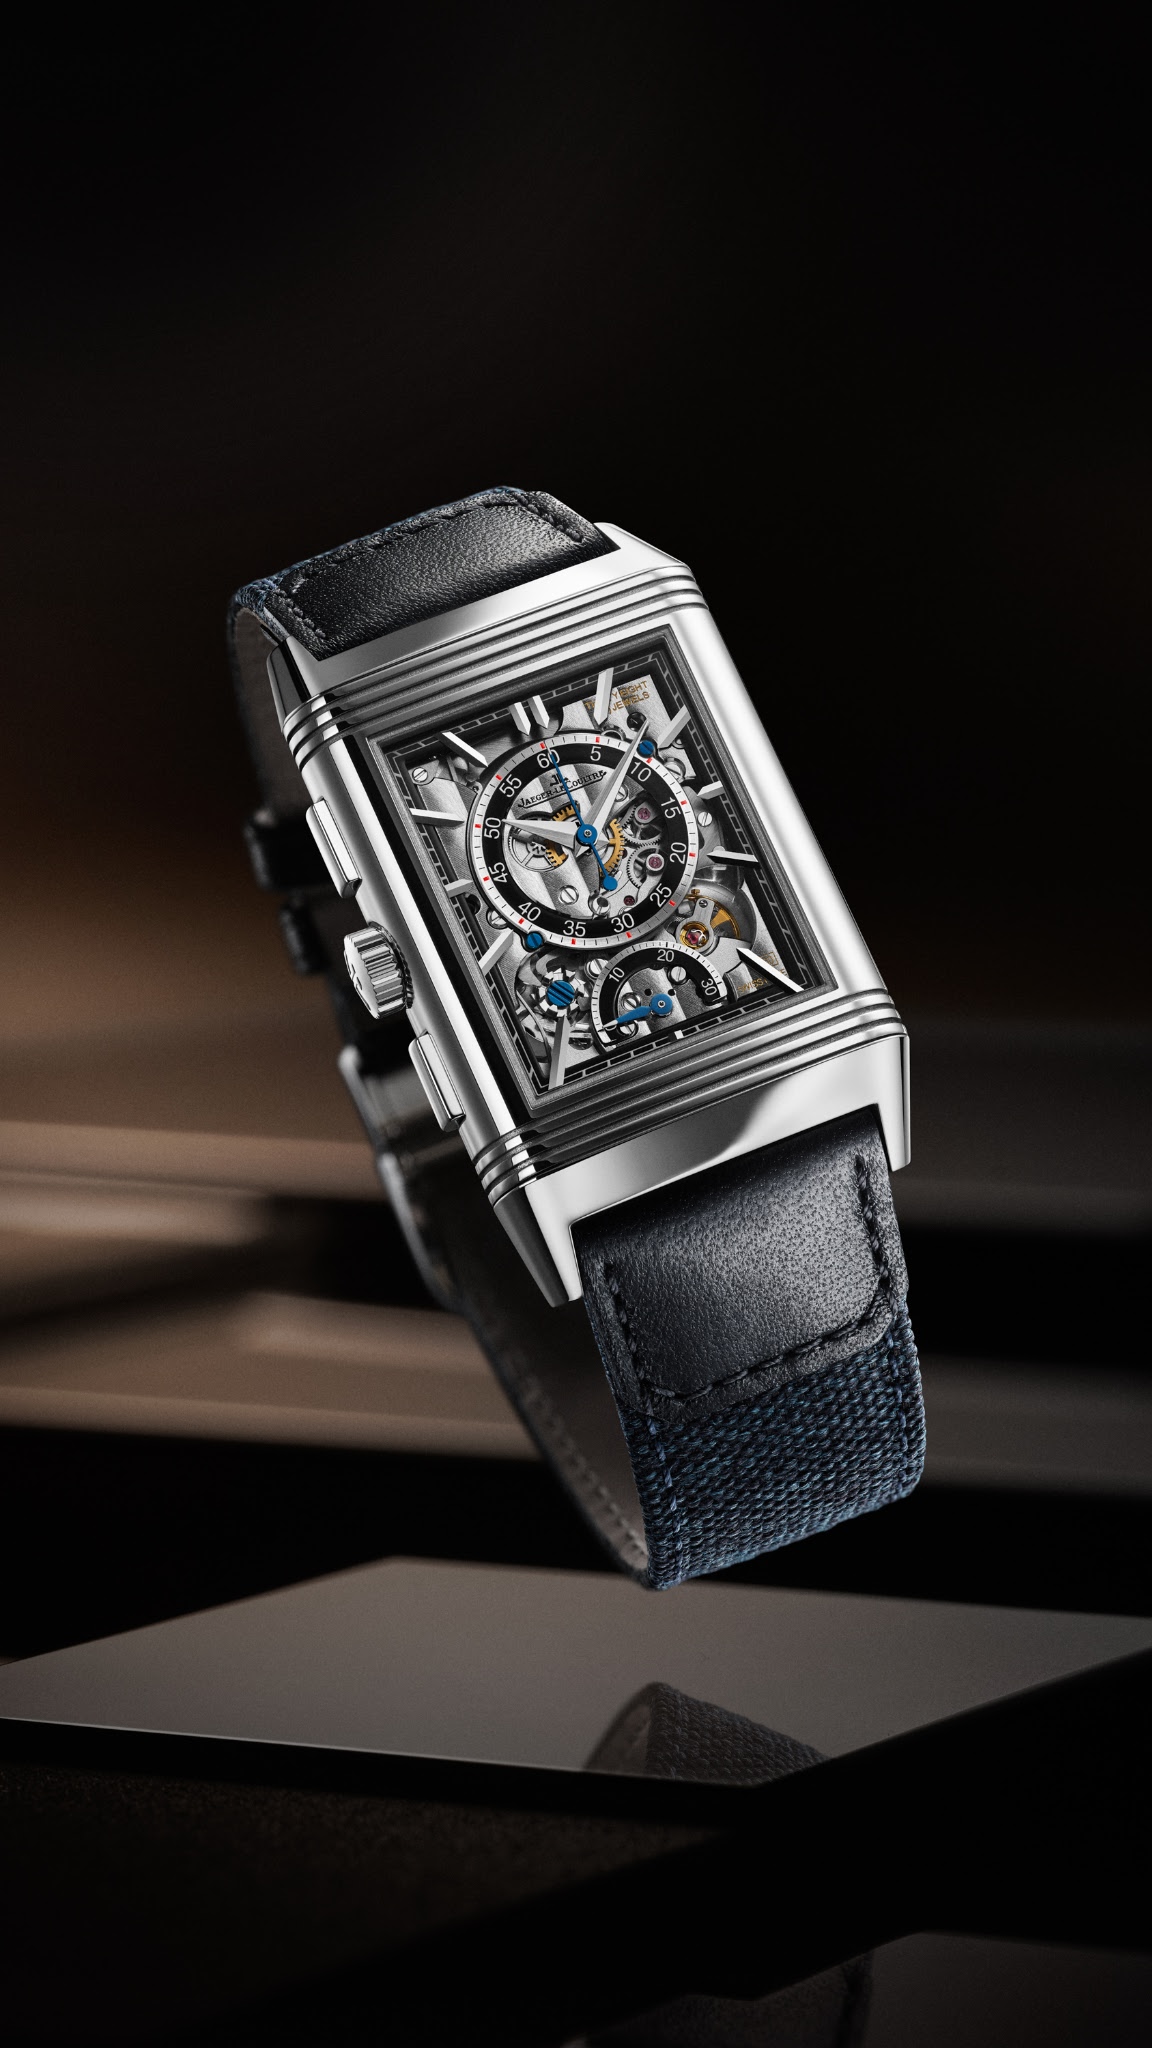 JLC - Two official photos of the Jaeger Lecoultre Reverso Tribute ...